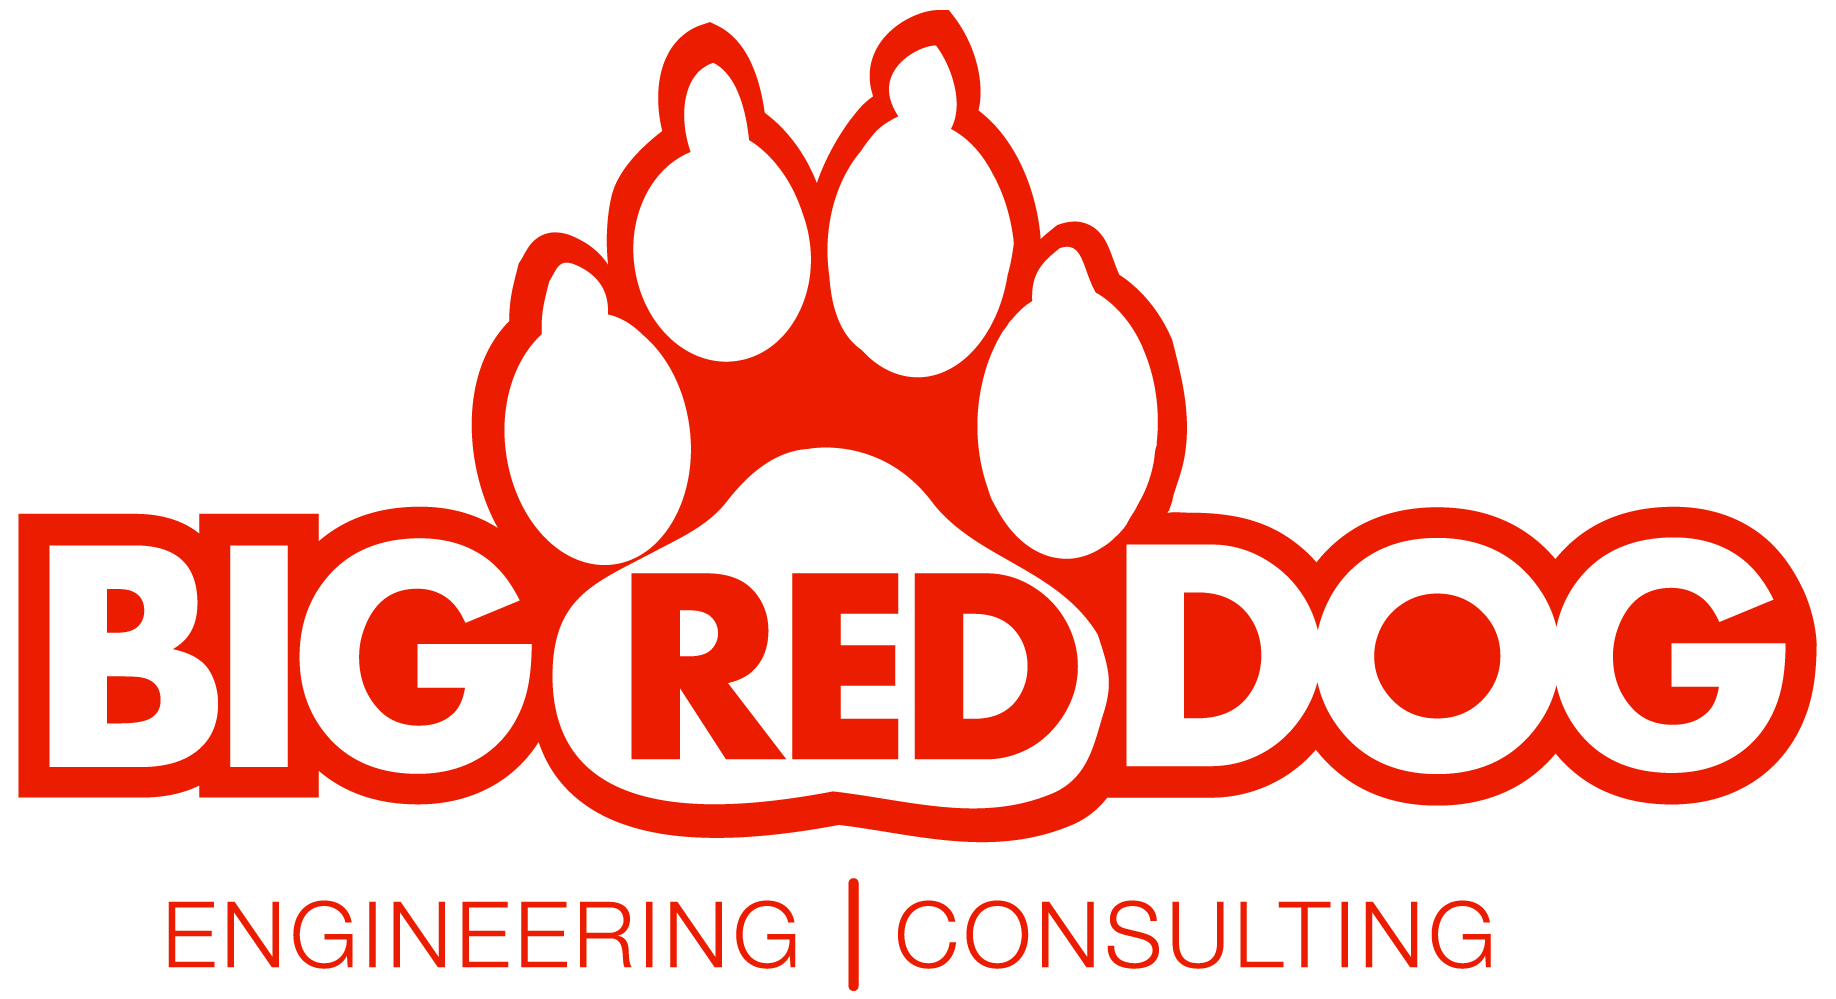 Big Red Oval Logo - Big Red Dog Competitors, Revenue and Employees Company Profile